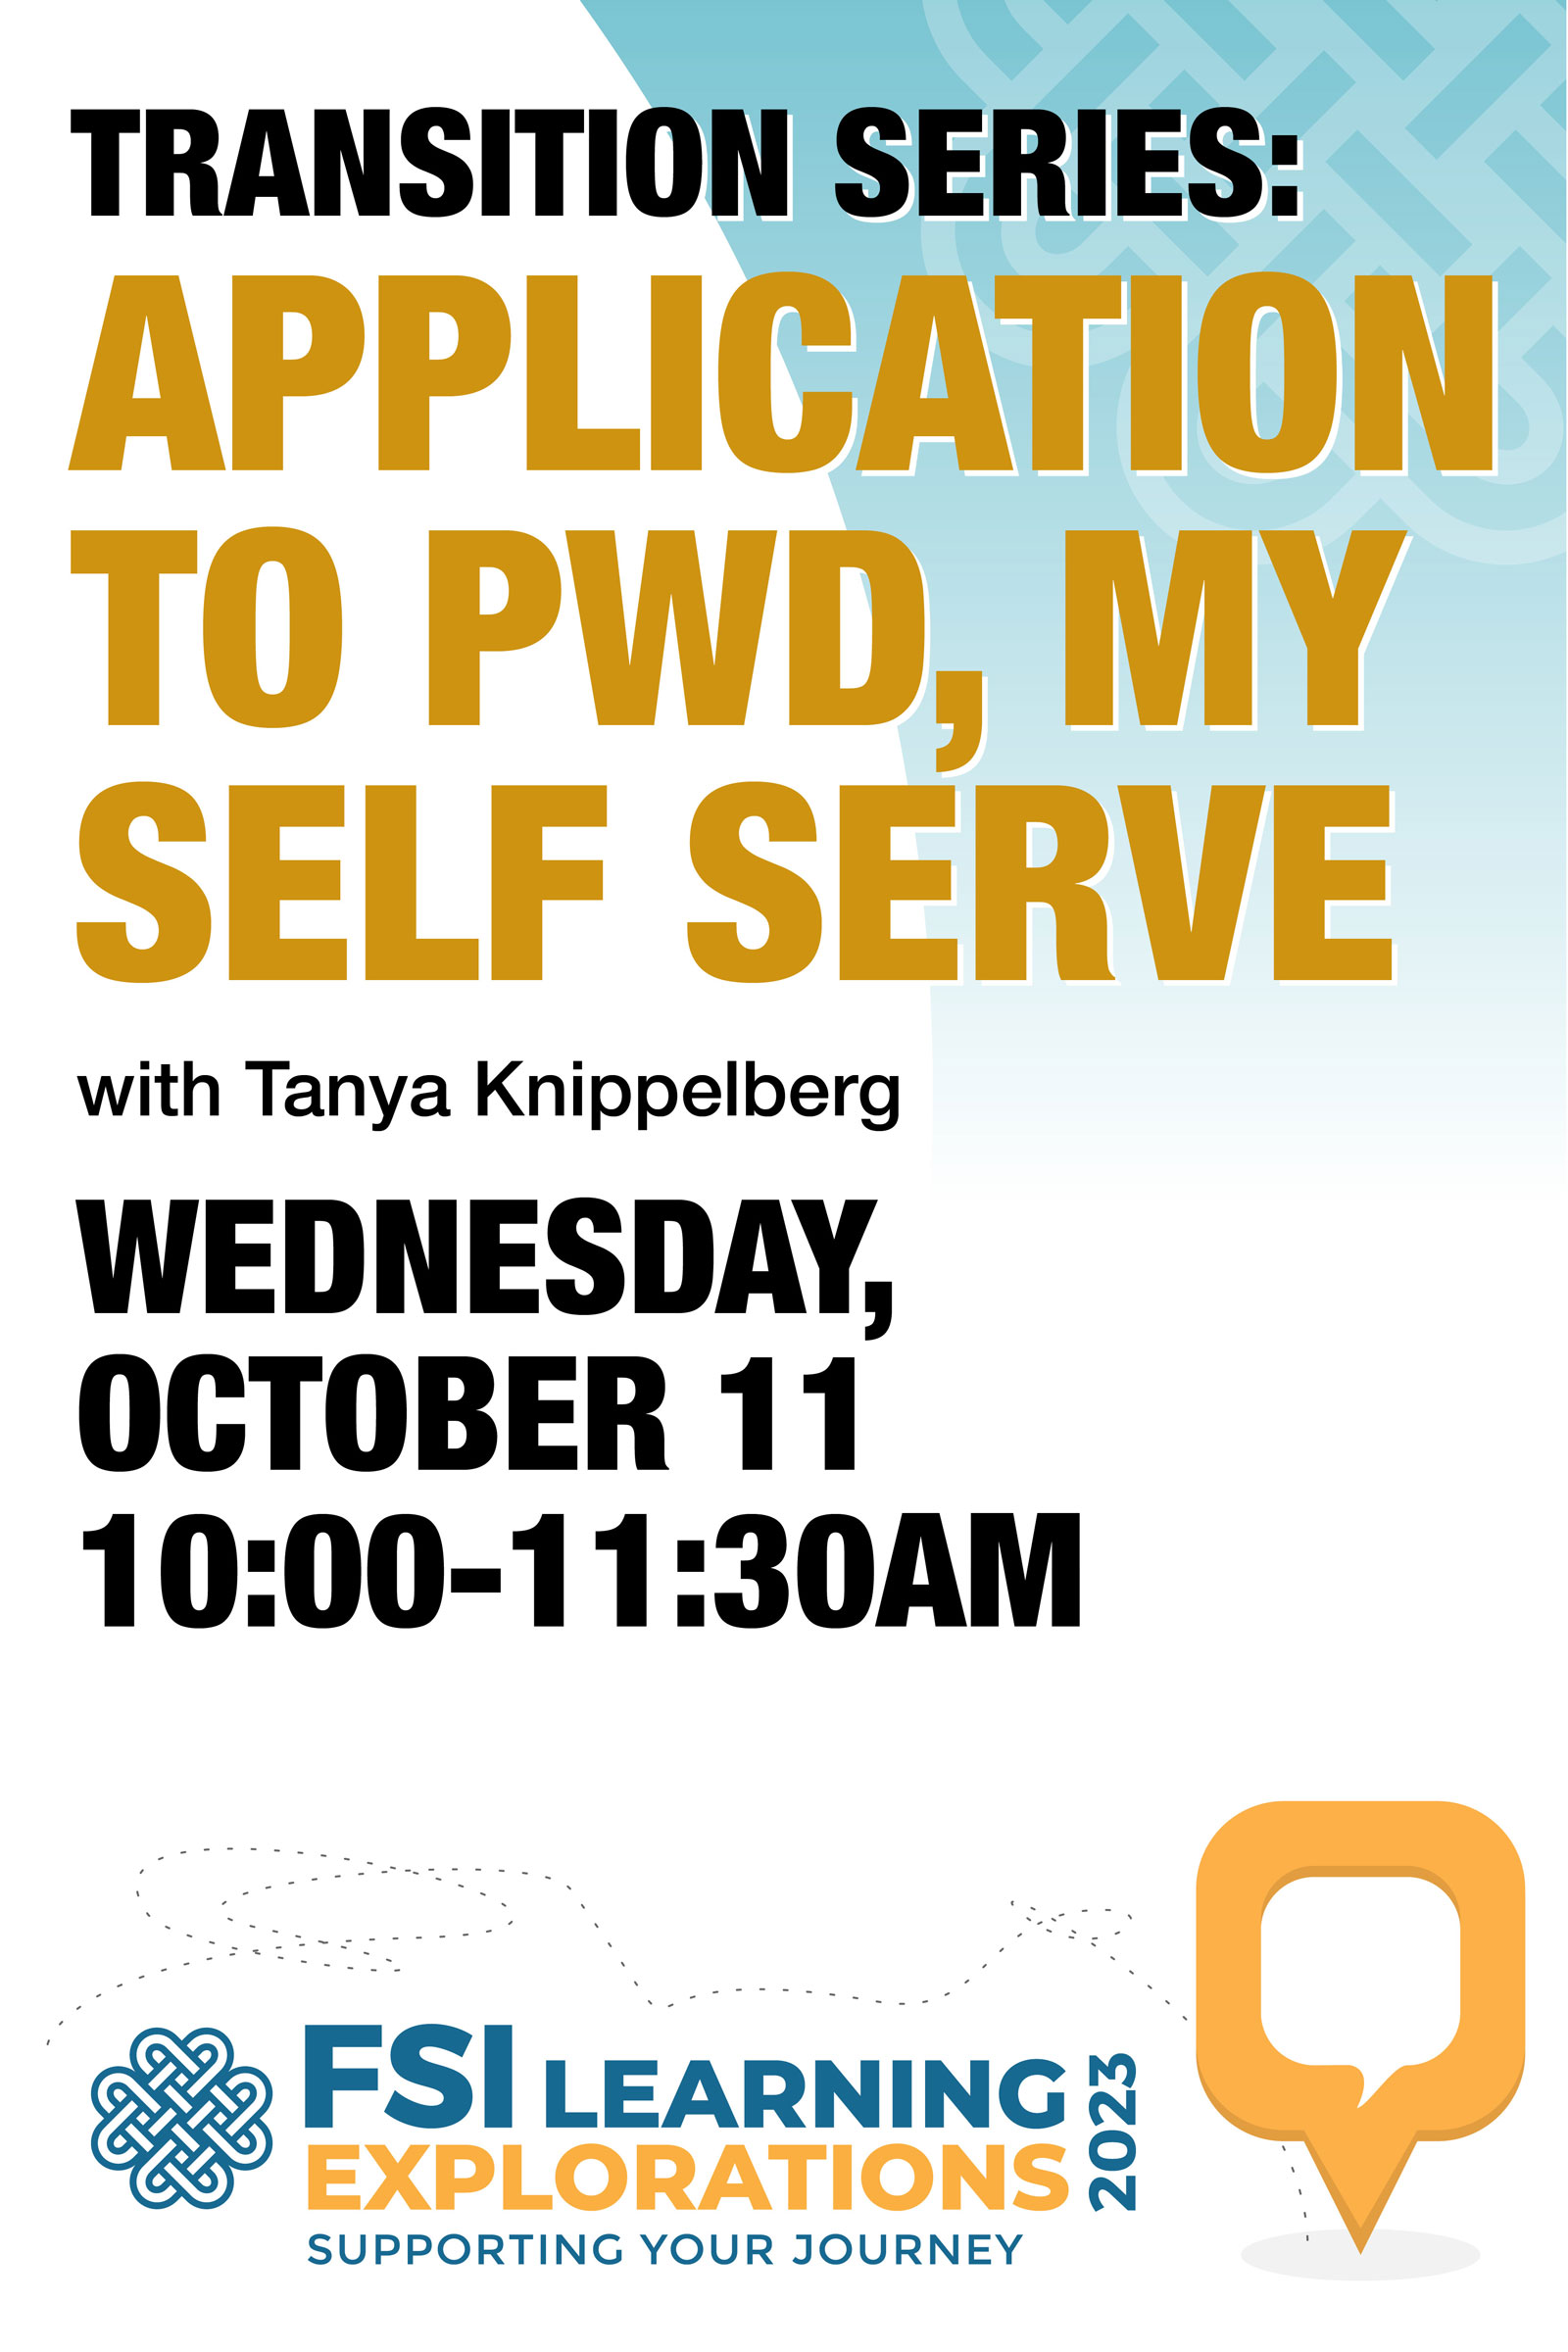 FSI Learning Explorations ~ Transition Series: Application to PWD, MY Self Serve